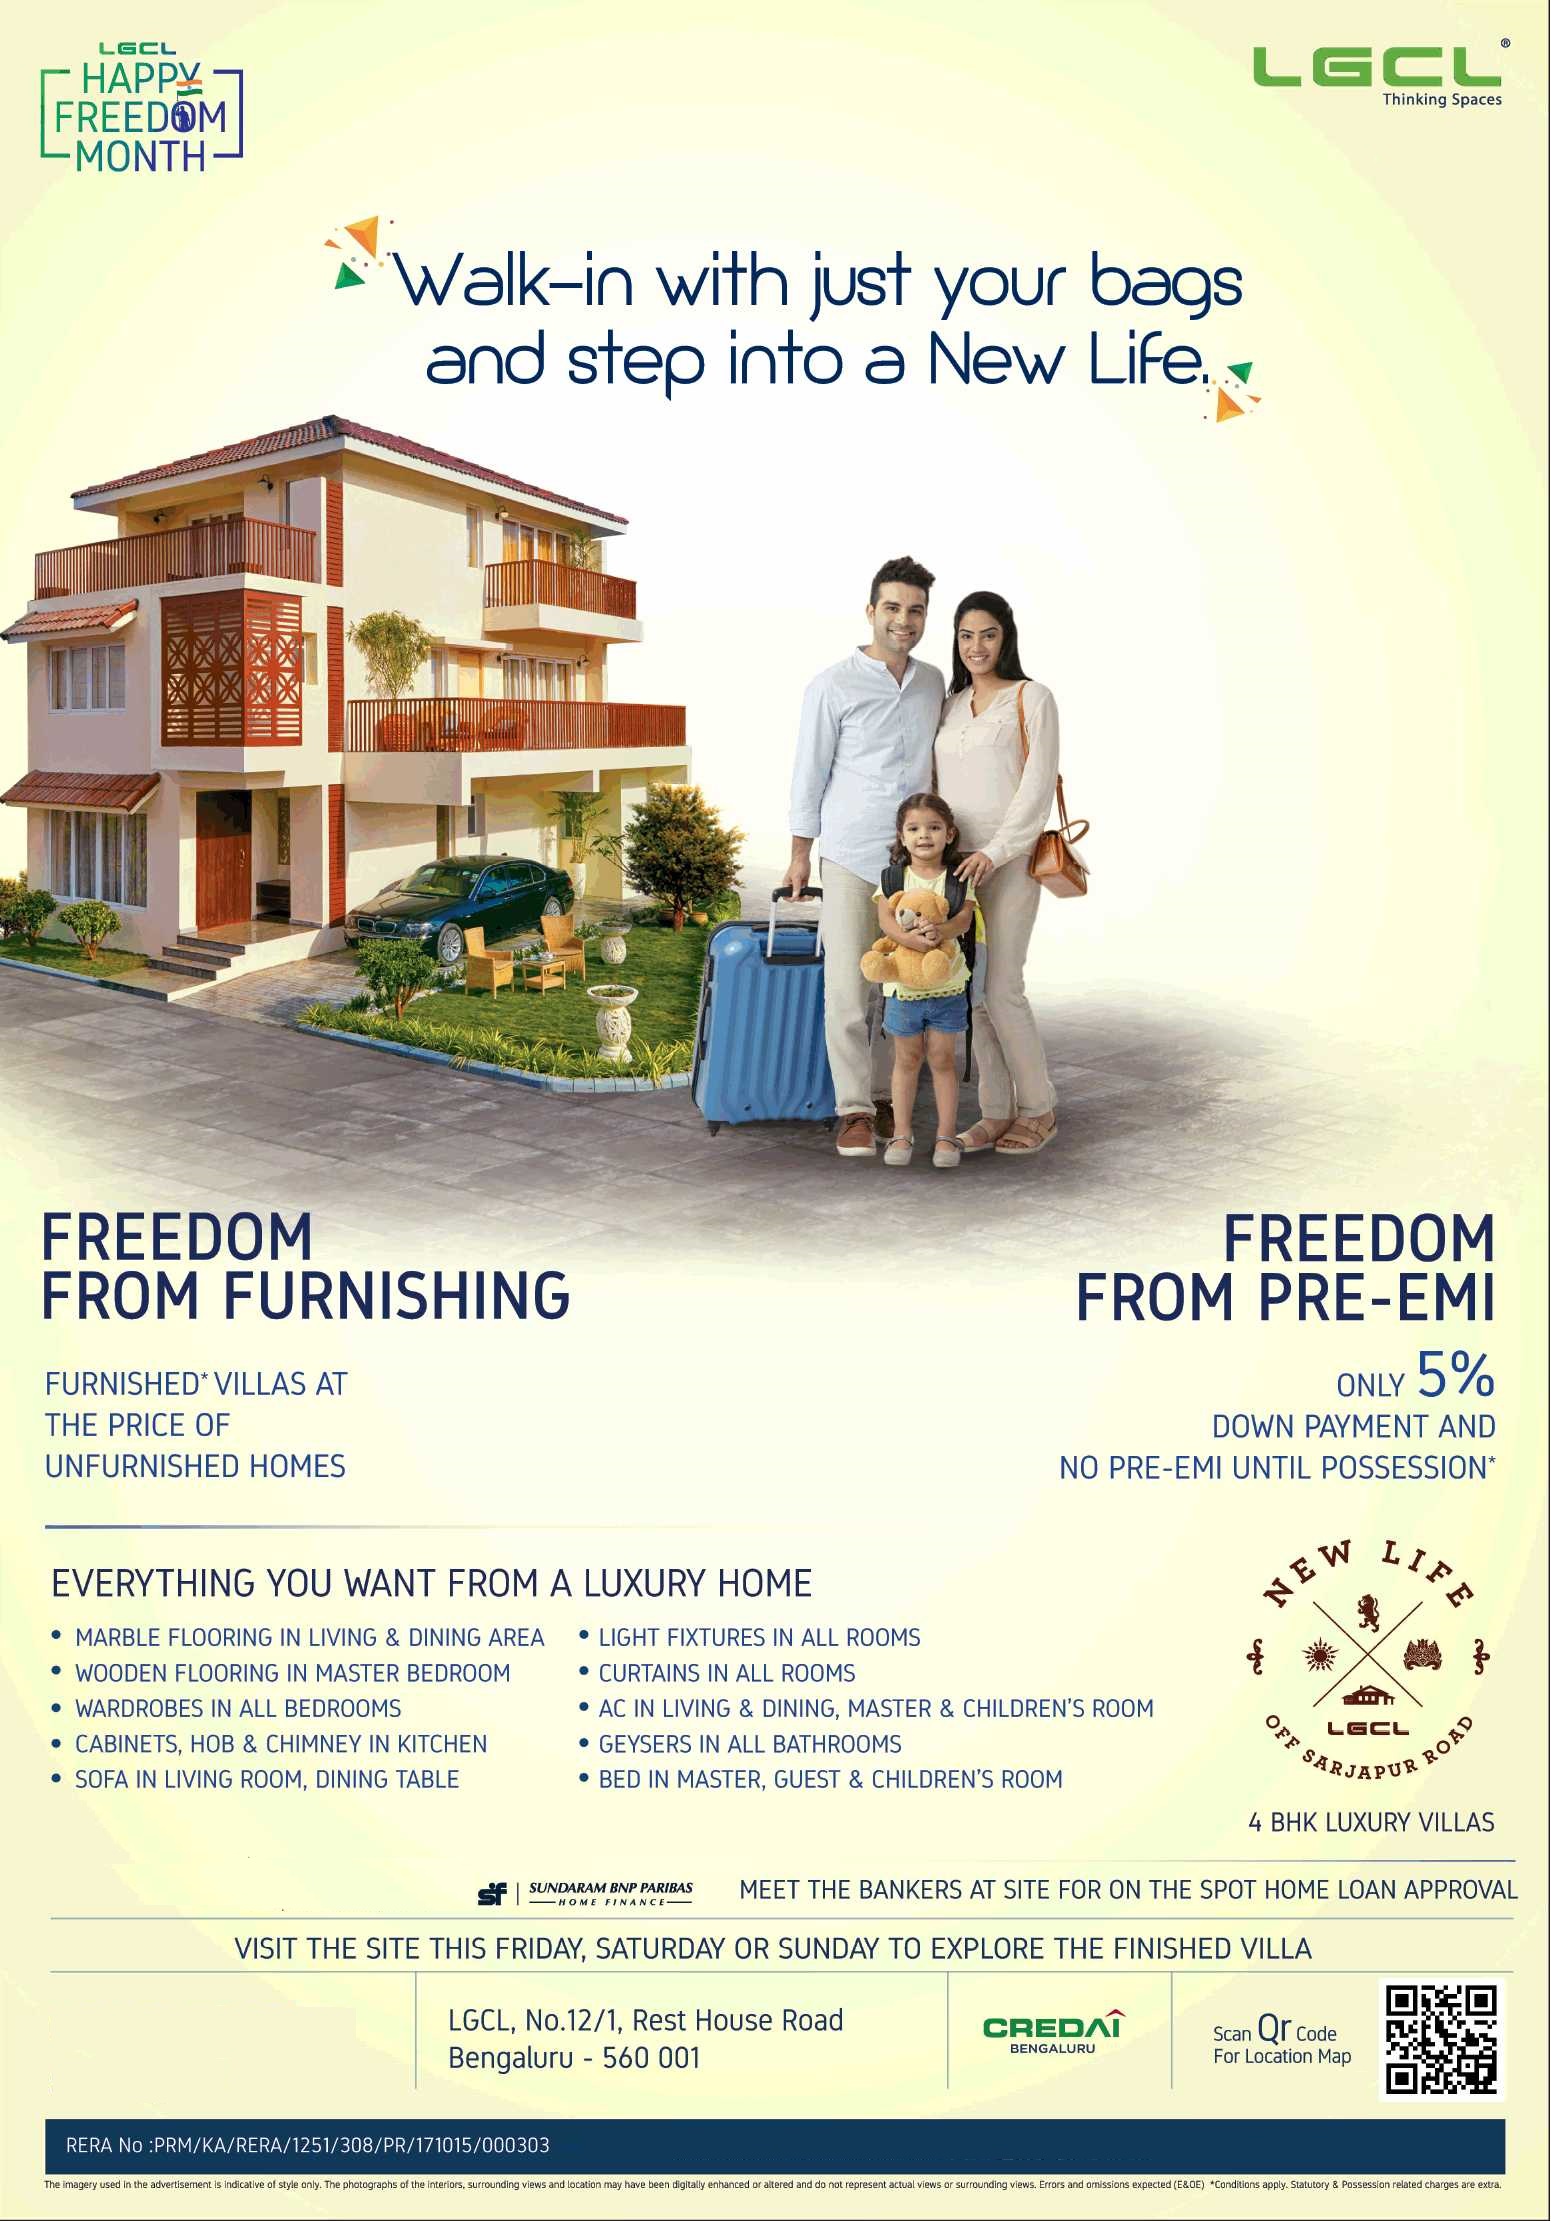 Pay only 5% down payment & no pre EMI till possession at LGCL Newlife in Bangalore